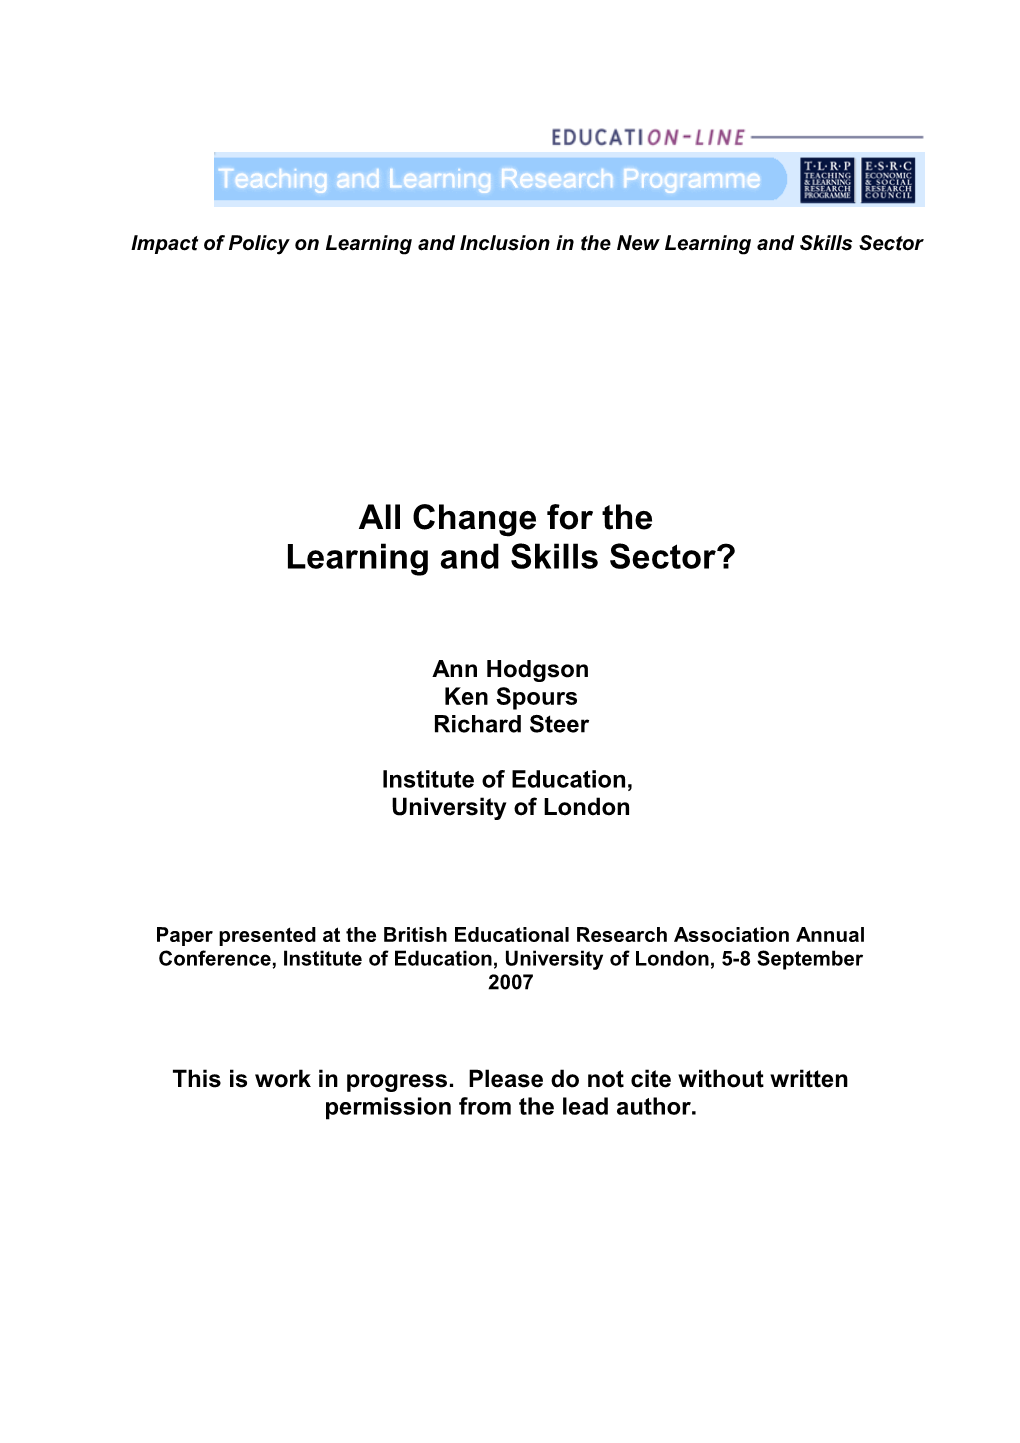 All Change: from Learning and Skills Sector to FE System 2001-2007